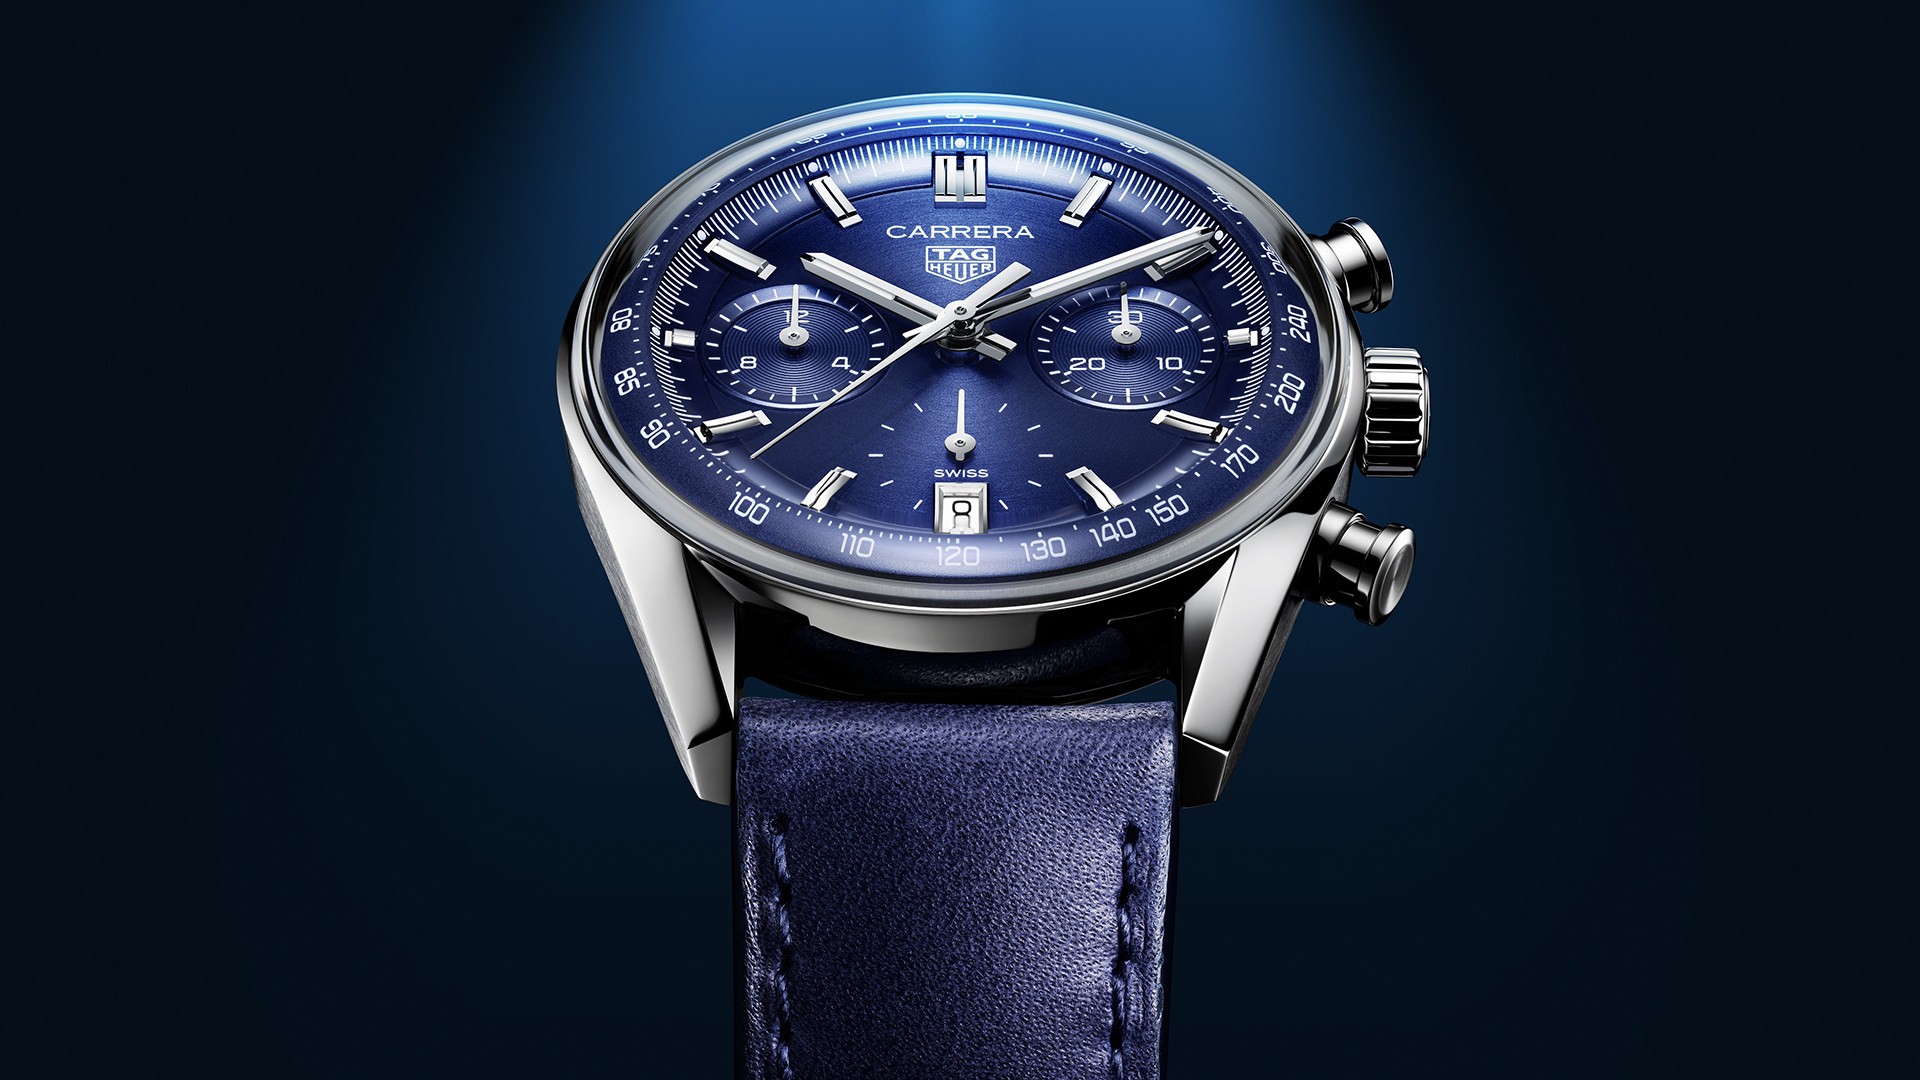 Watches Wonders Tag Heuer celebrates its Carrera watch, worn by Mick Jagger Ryan Gosling, with new Chronograph and Chronograph Tourbillon versions for its 60th anniversary | South China Morning